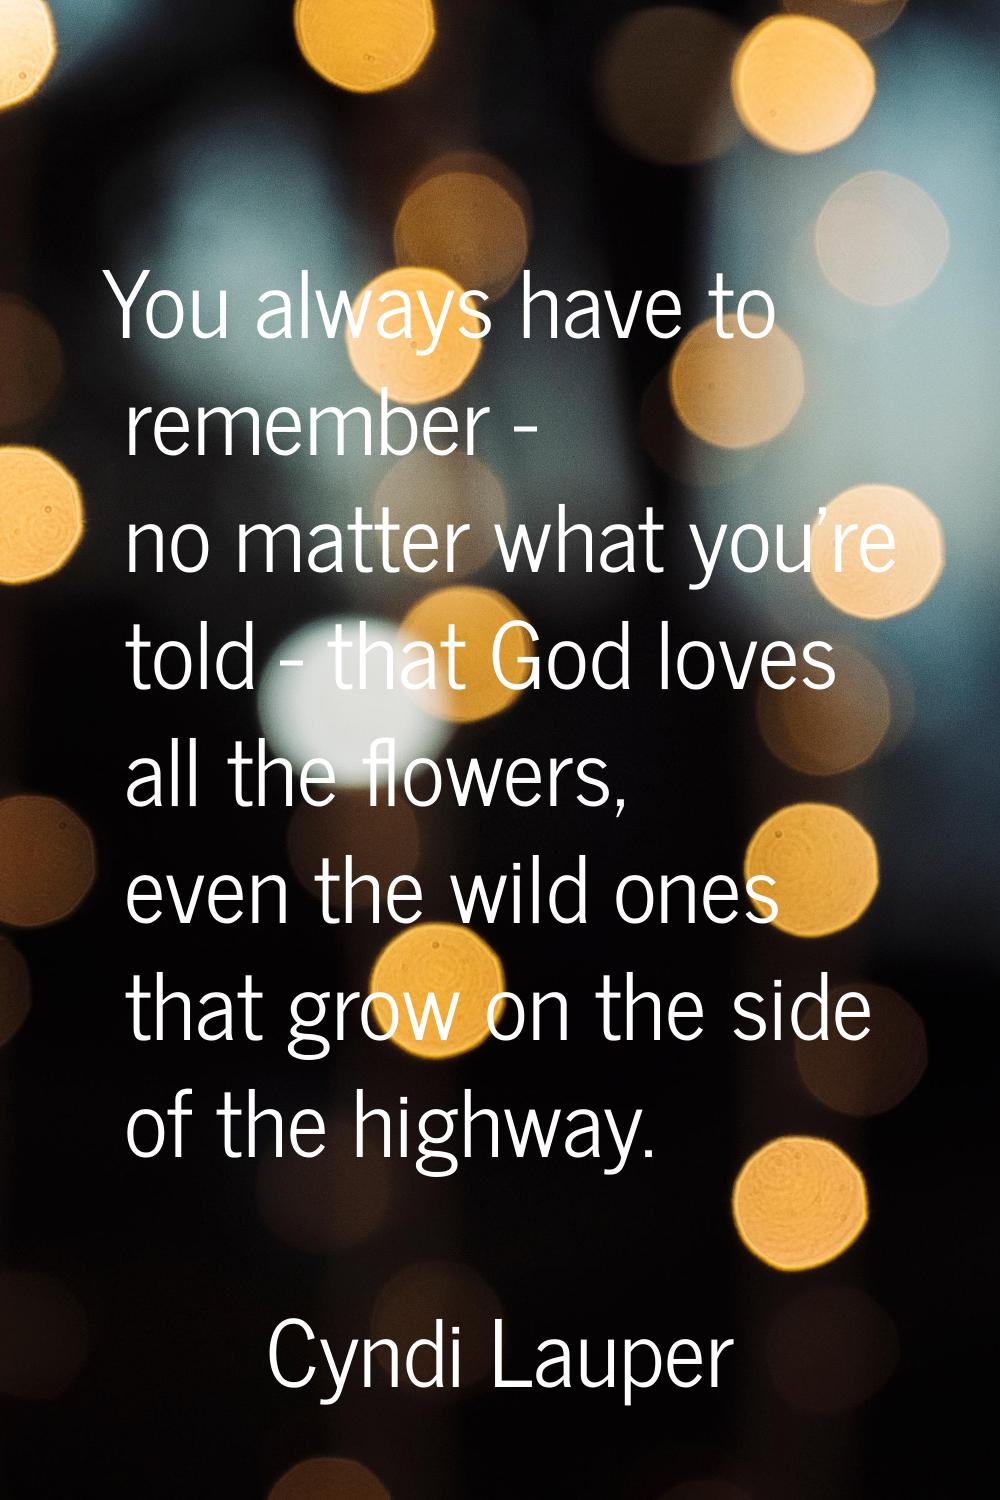 You always have to remember - no matter what you're told - that God loves all the flowers, even the